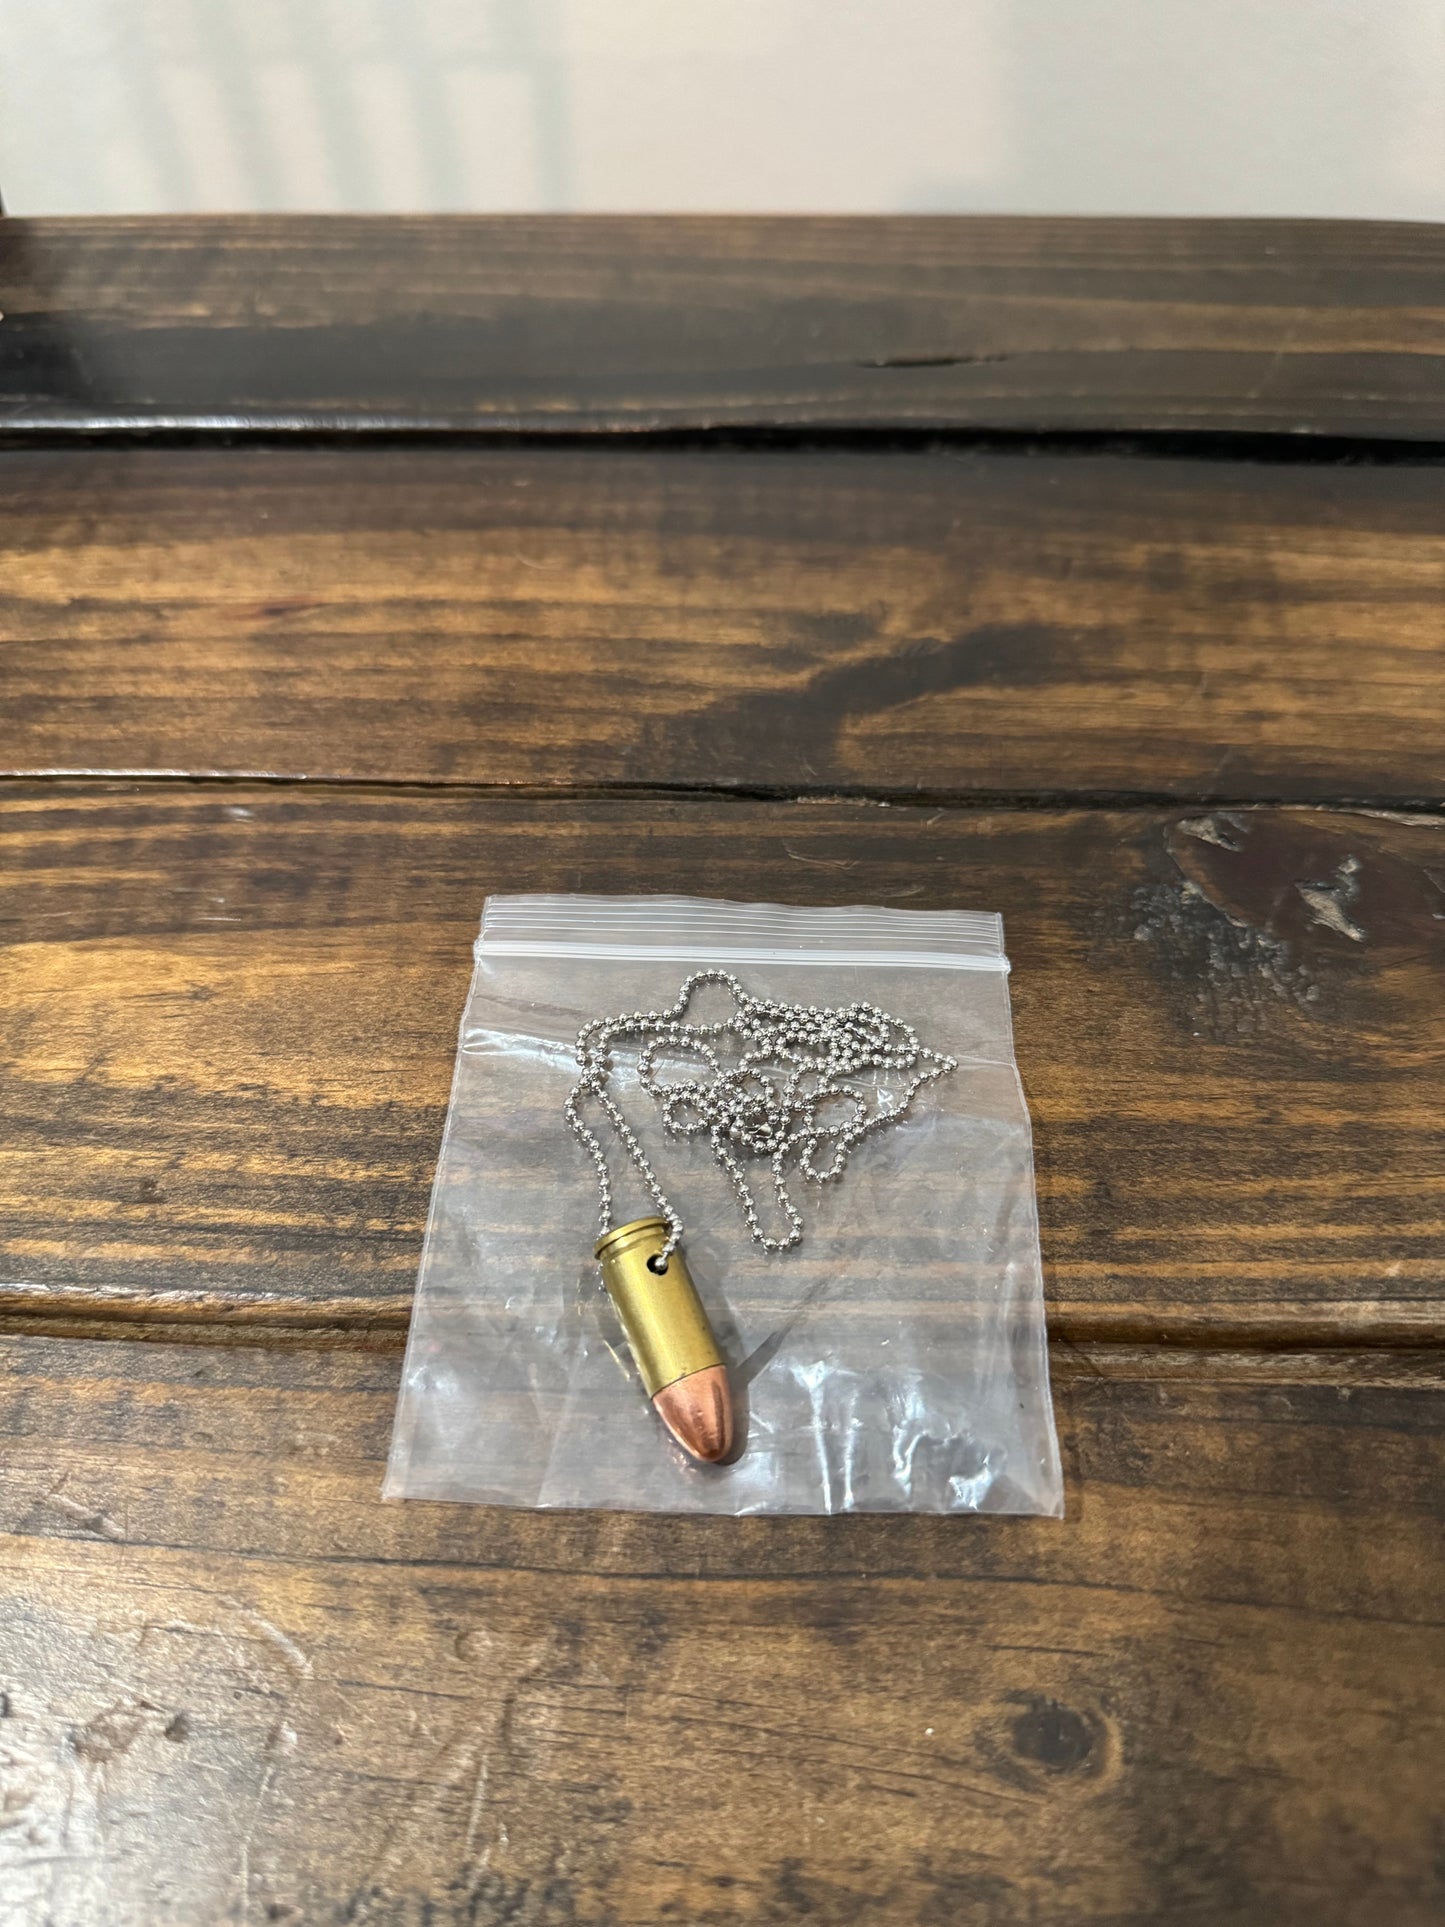 Merch Bullet Necklace Hand Made by KeepRTuned (9mm)